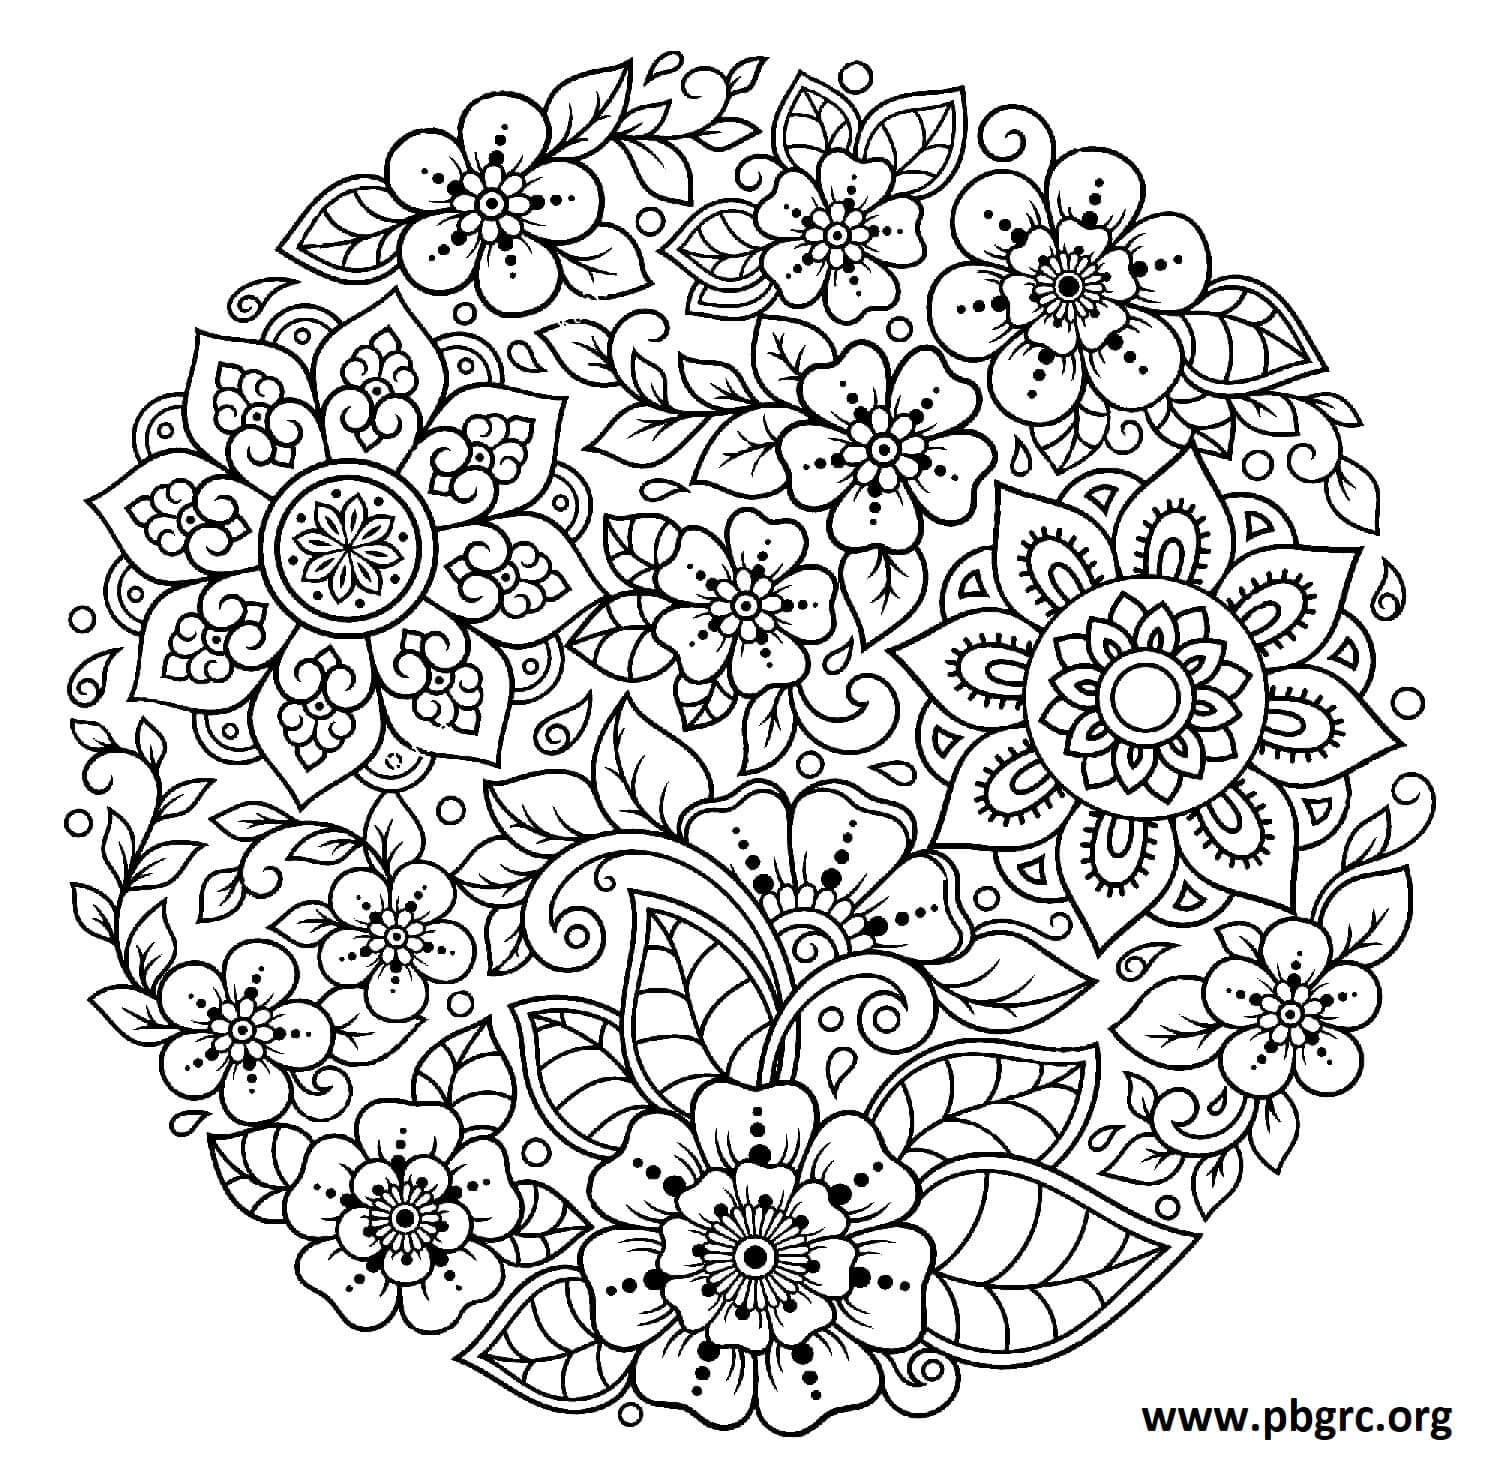 Mandala Coloring Pages For Adults